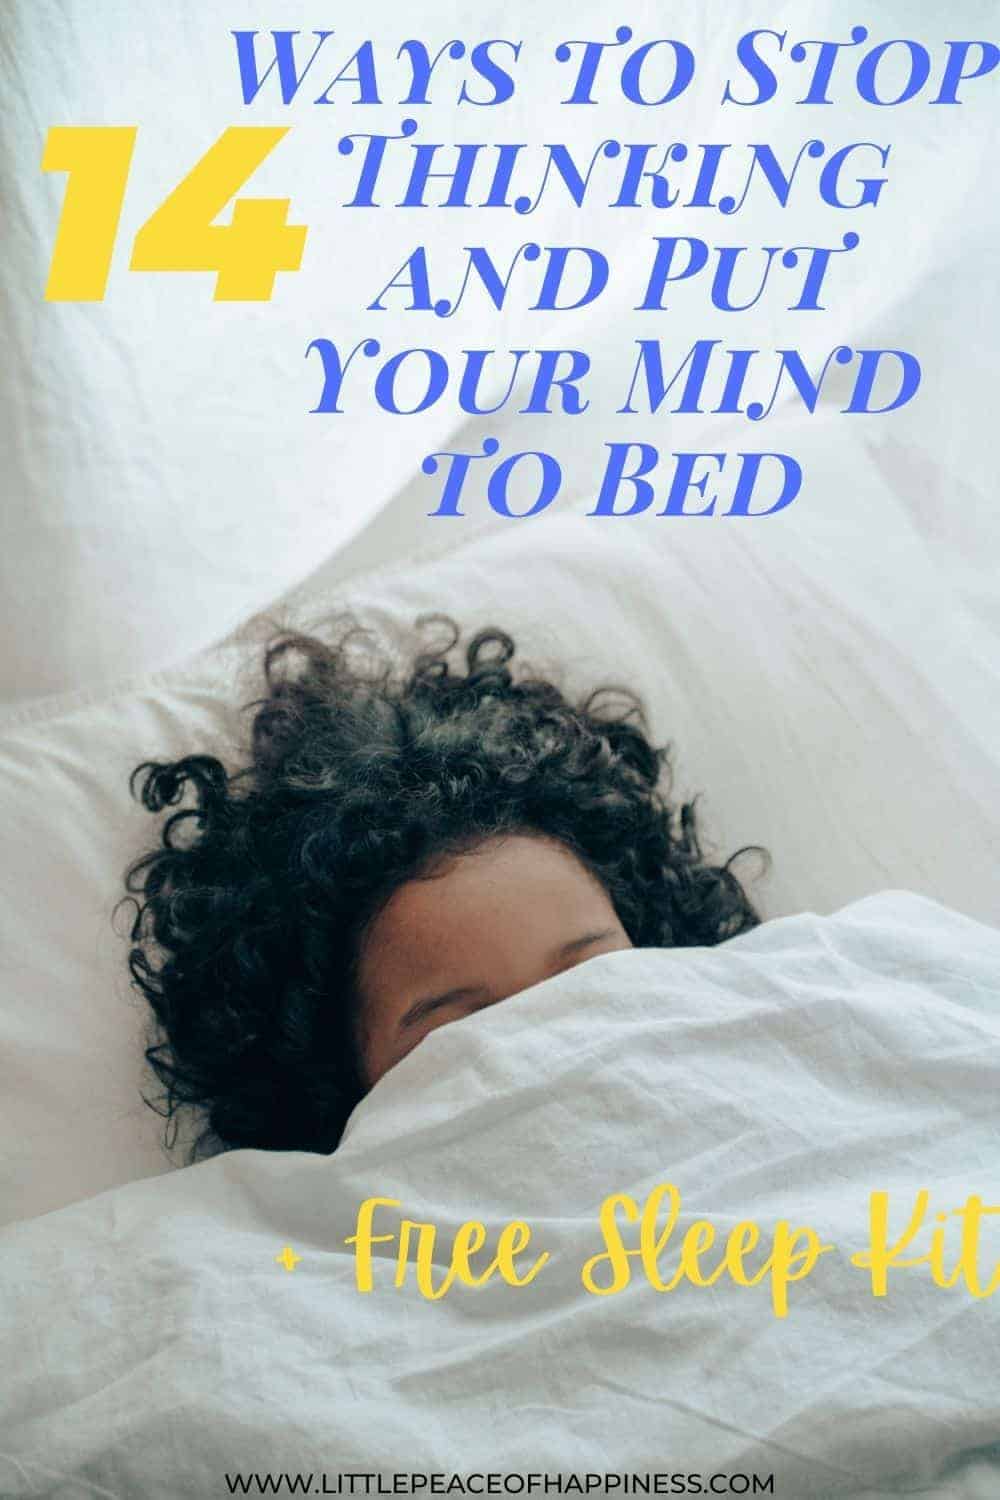 14 ways to stop thinking and put your mind to bed